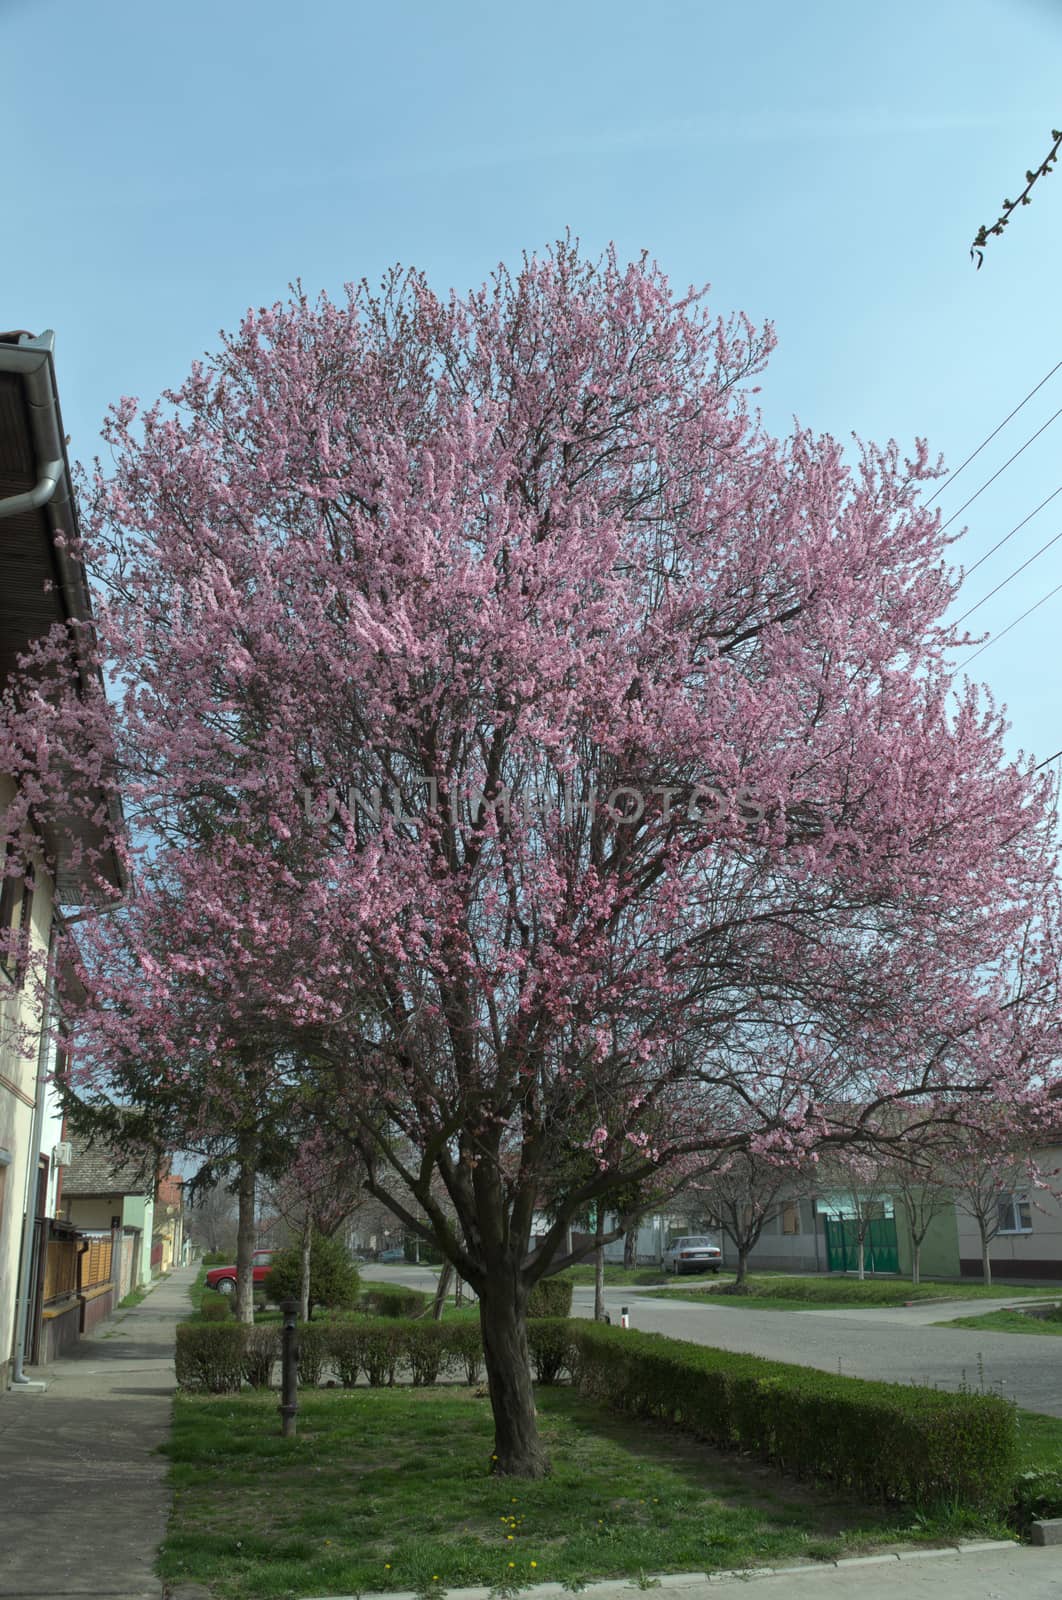 Tree blossoming with pink flowers, at spring time